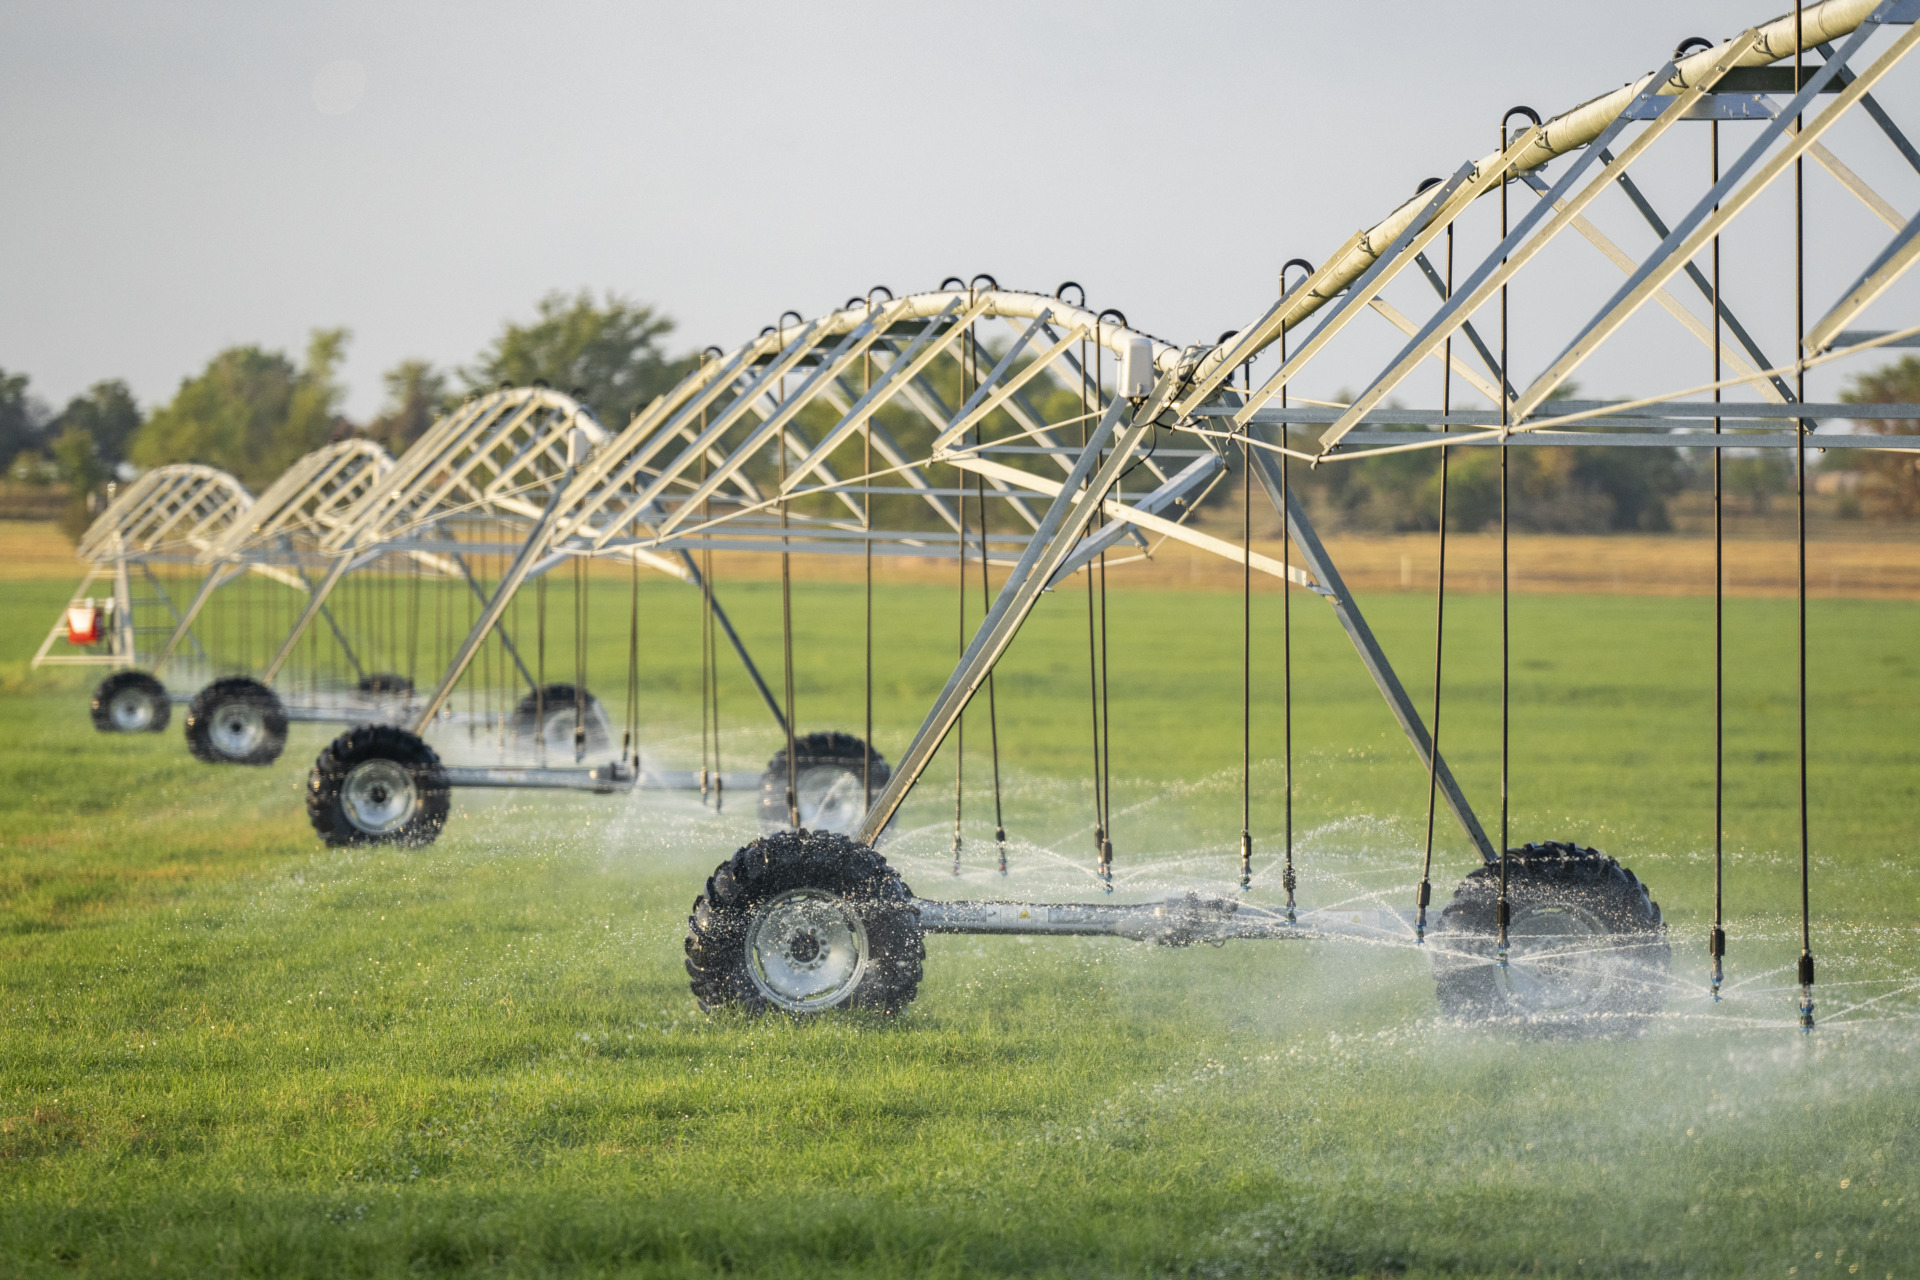 A new Center for North American Studies report shows the importance and value of irrigation water for crop production in the Lower Rio Grande Valley.